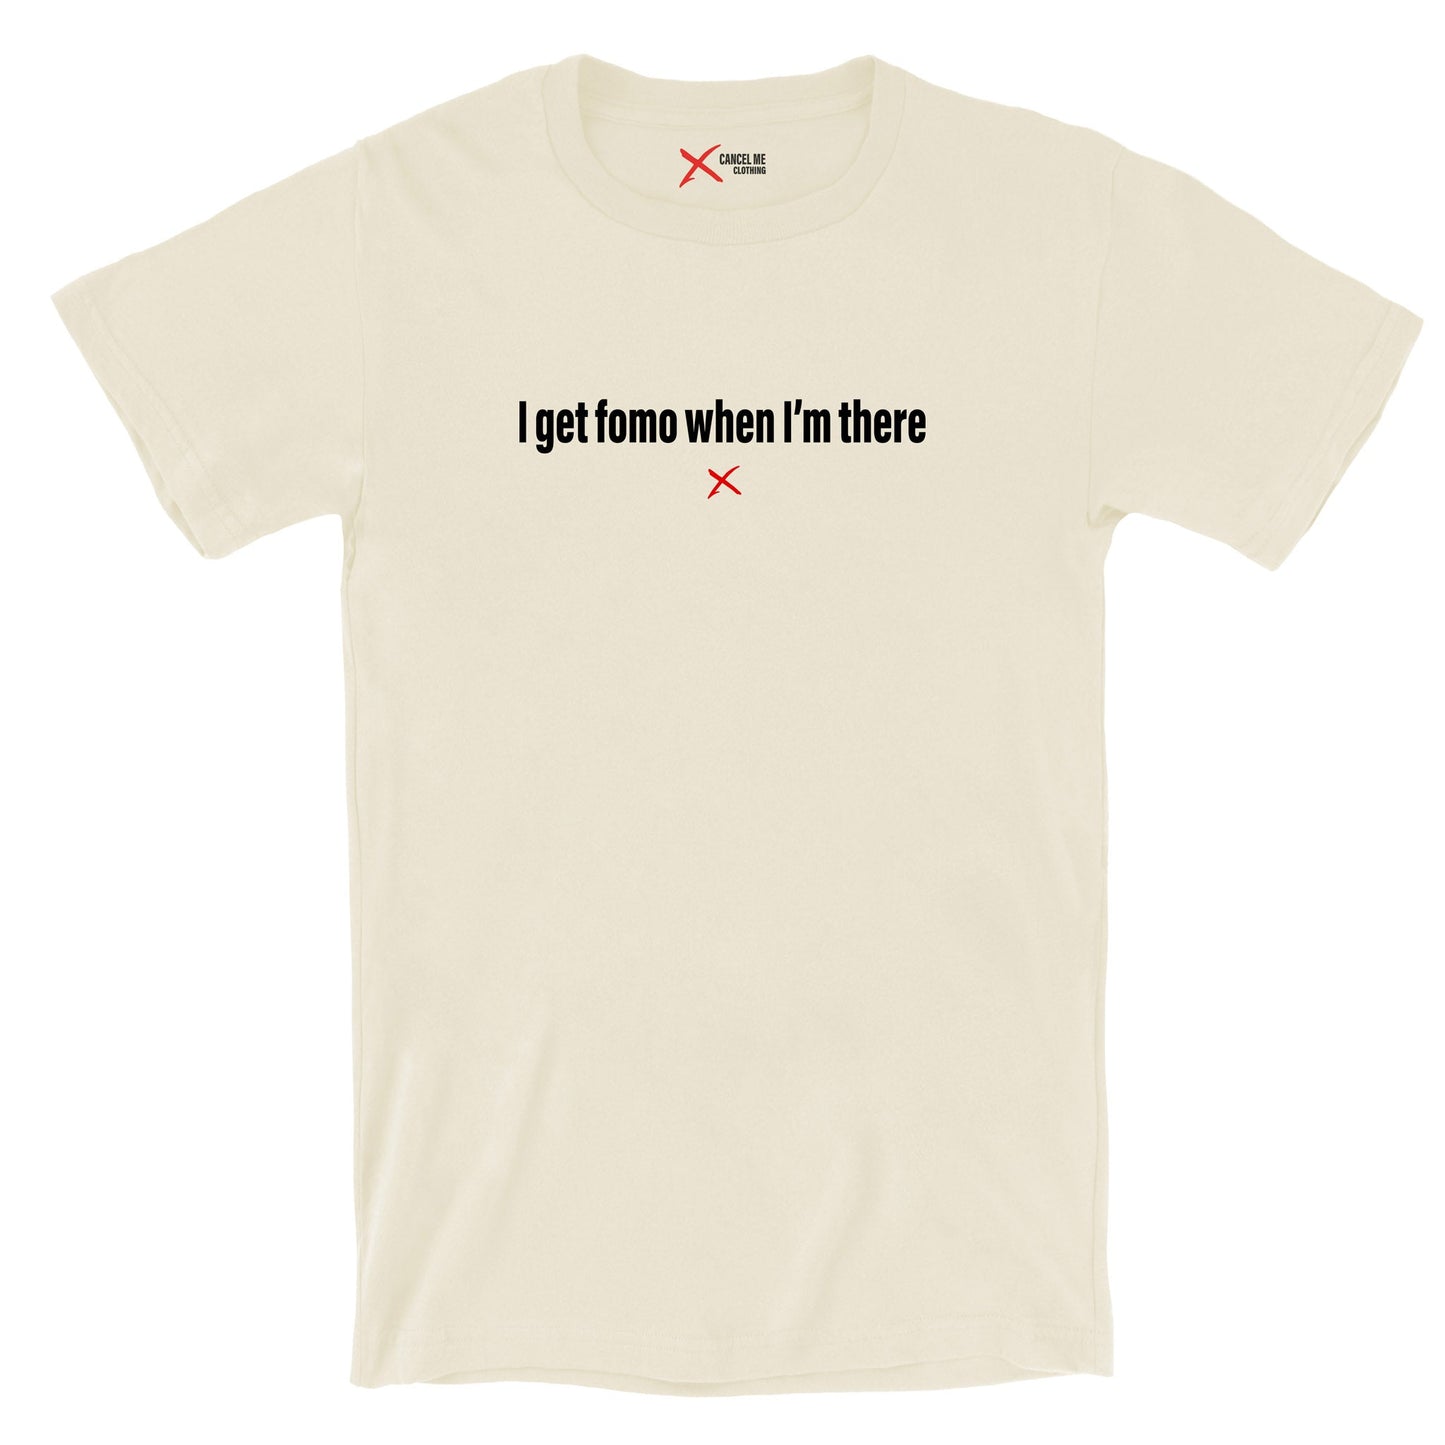 I get fomo when I'm there - Shirt